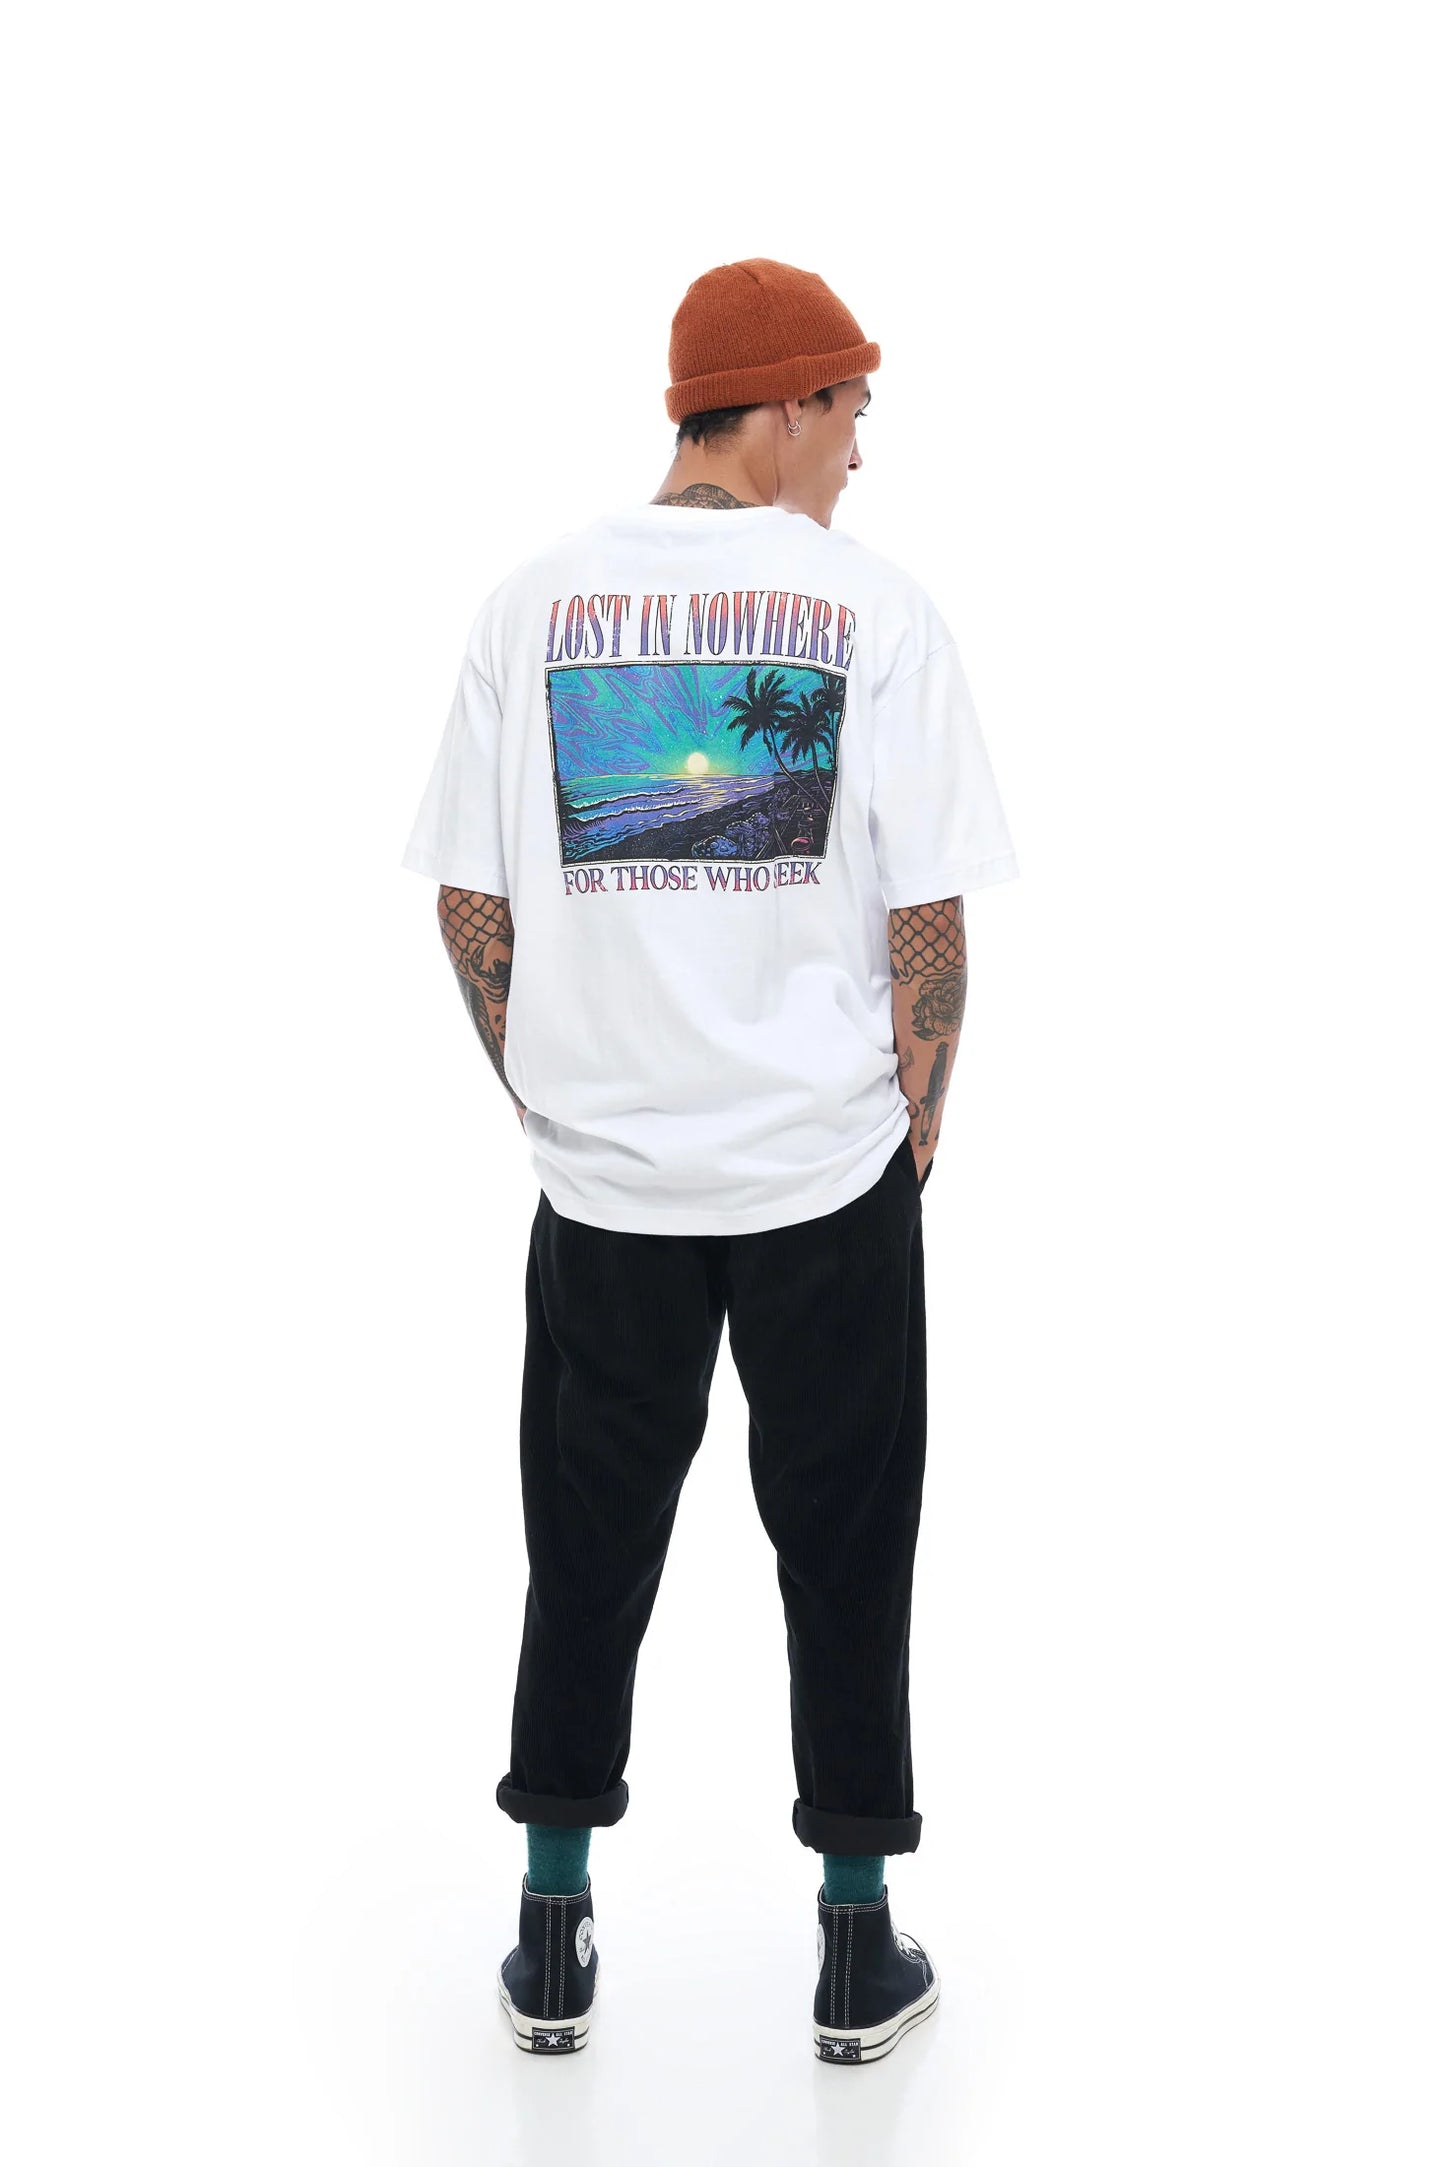 LOST IN NOWHERE // Retro Surf Tee WHITE